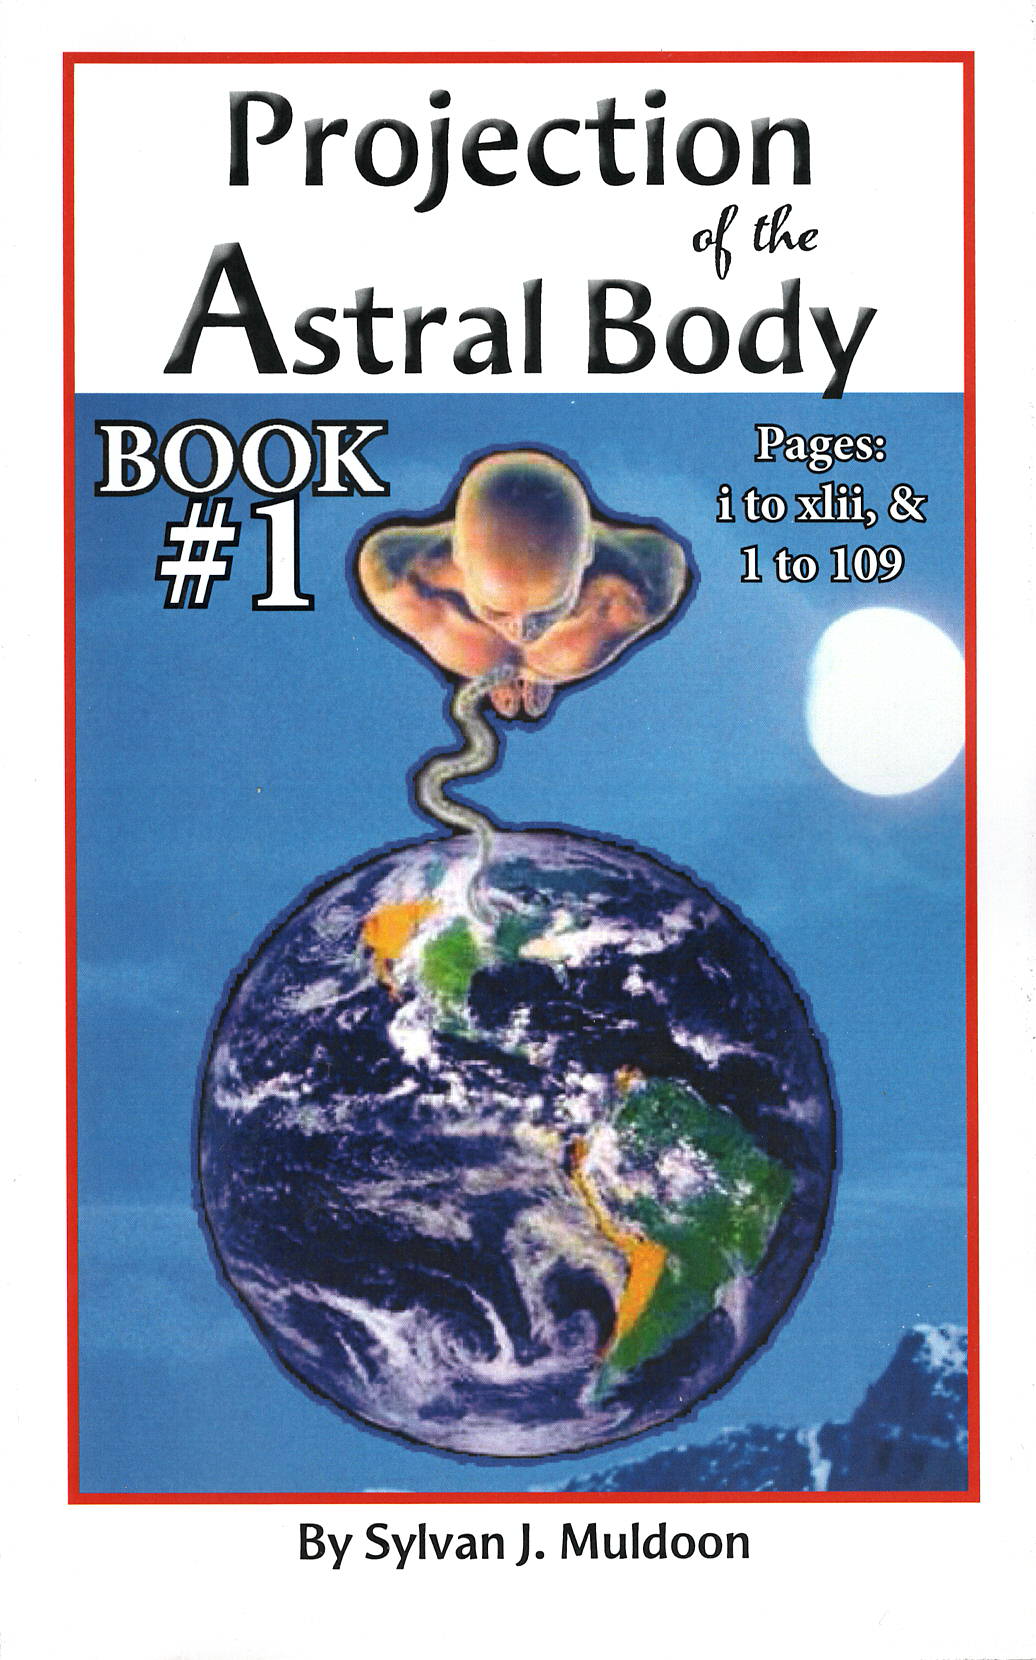 Projection of the Astral Body, By Sylvan J. Muldoon